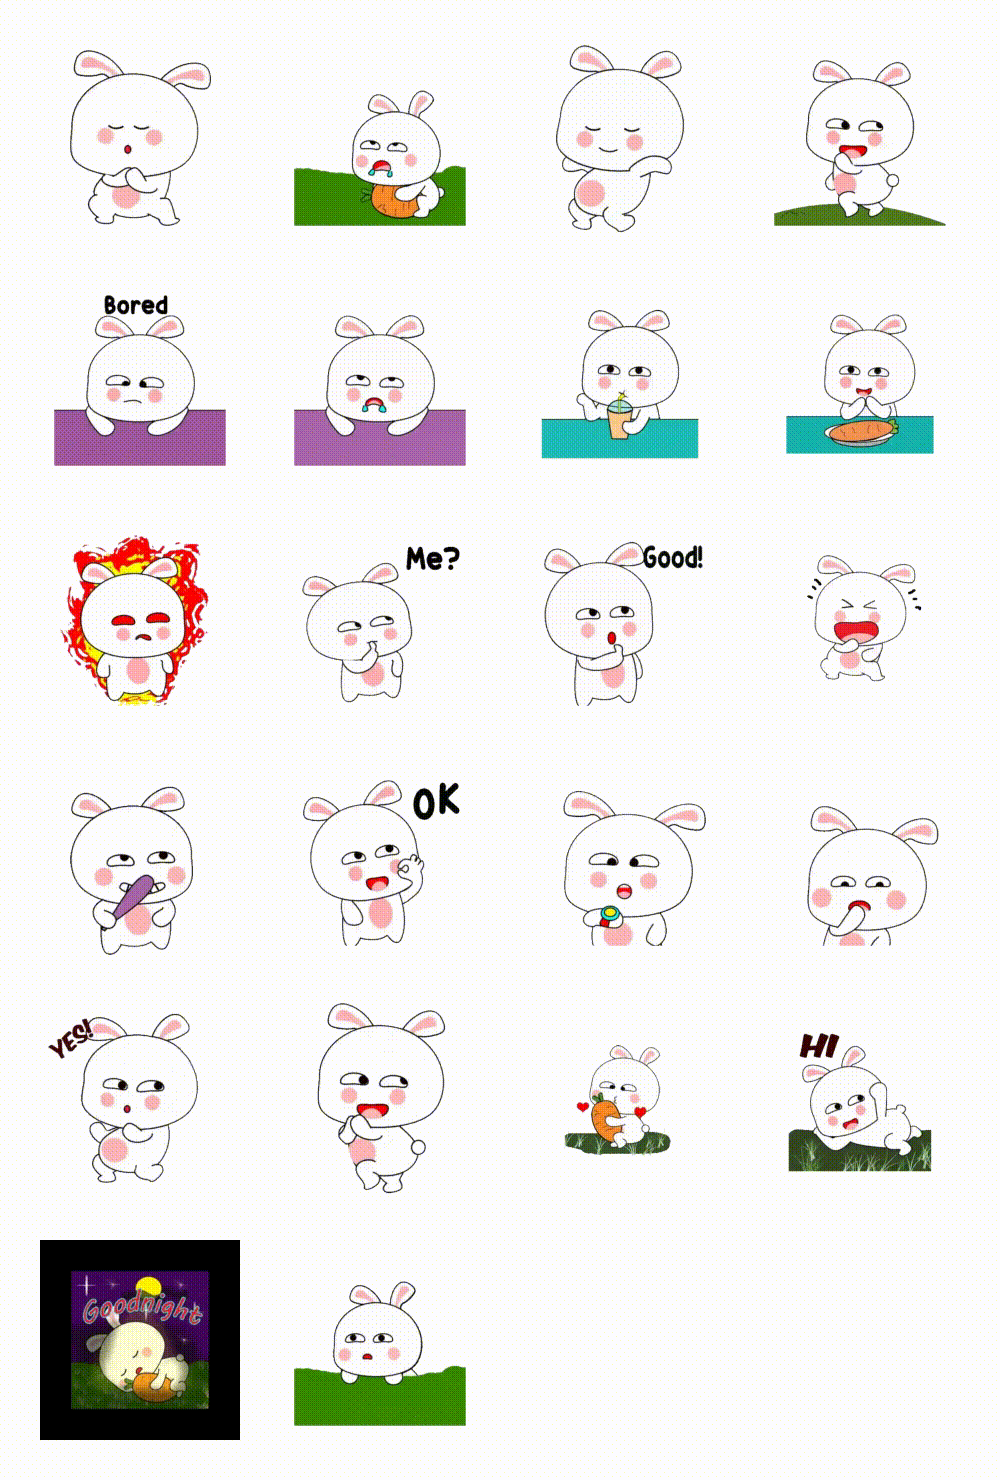 Cute Bunny Animation/Cartoon,Animals,Romance sticker pack for Whatsapp, Telegram, Signal, and others chatting and message apps